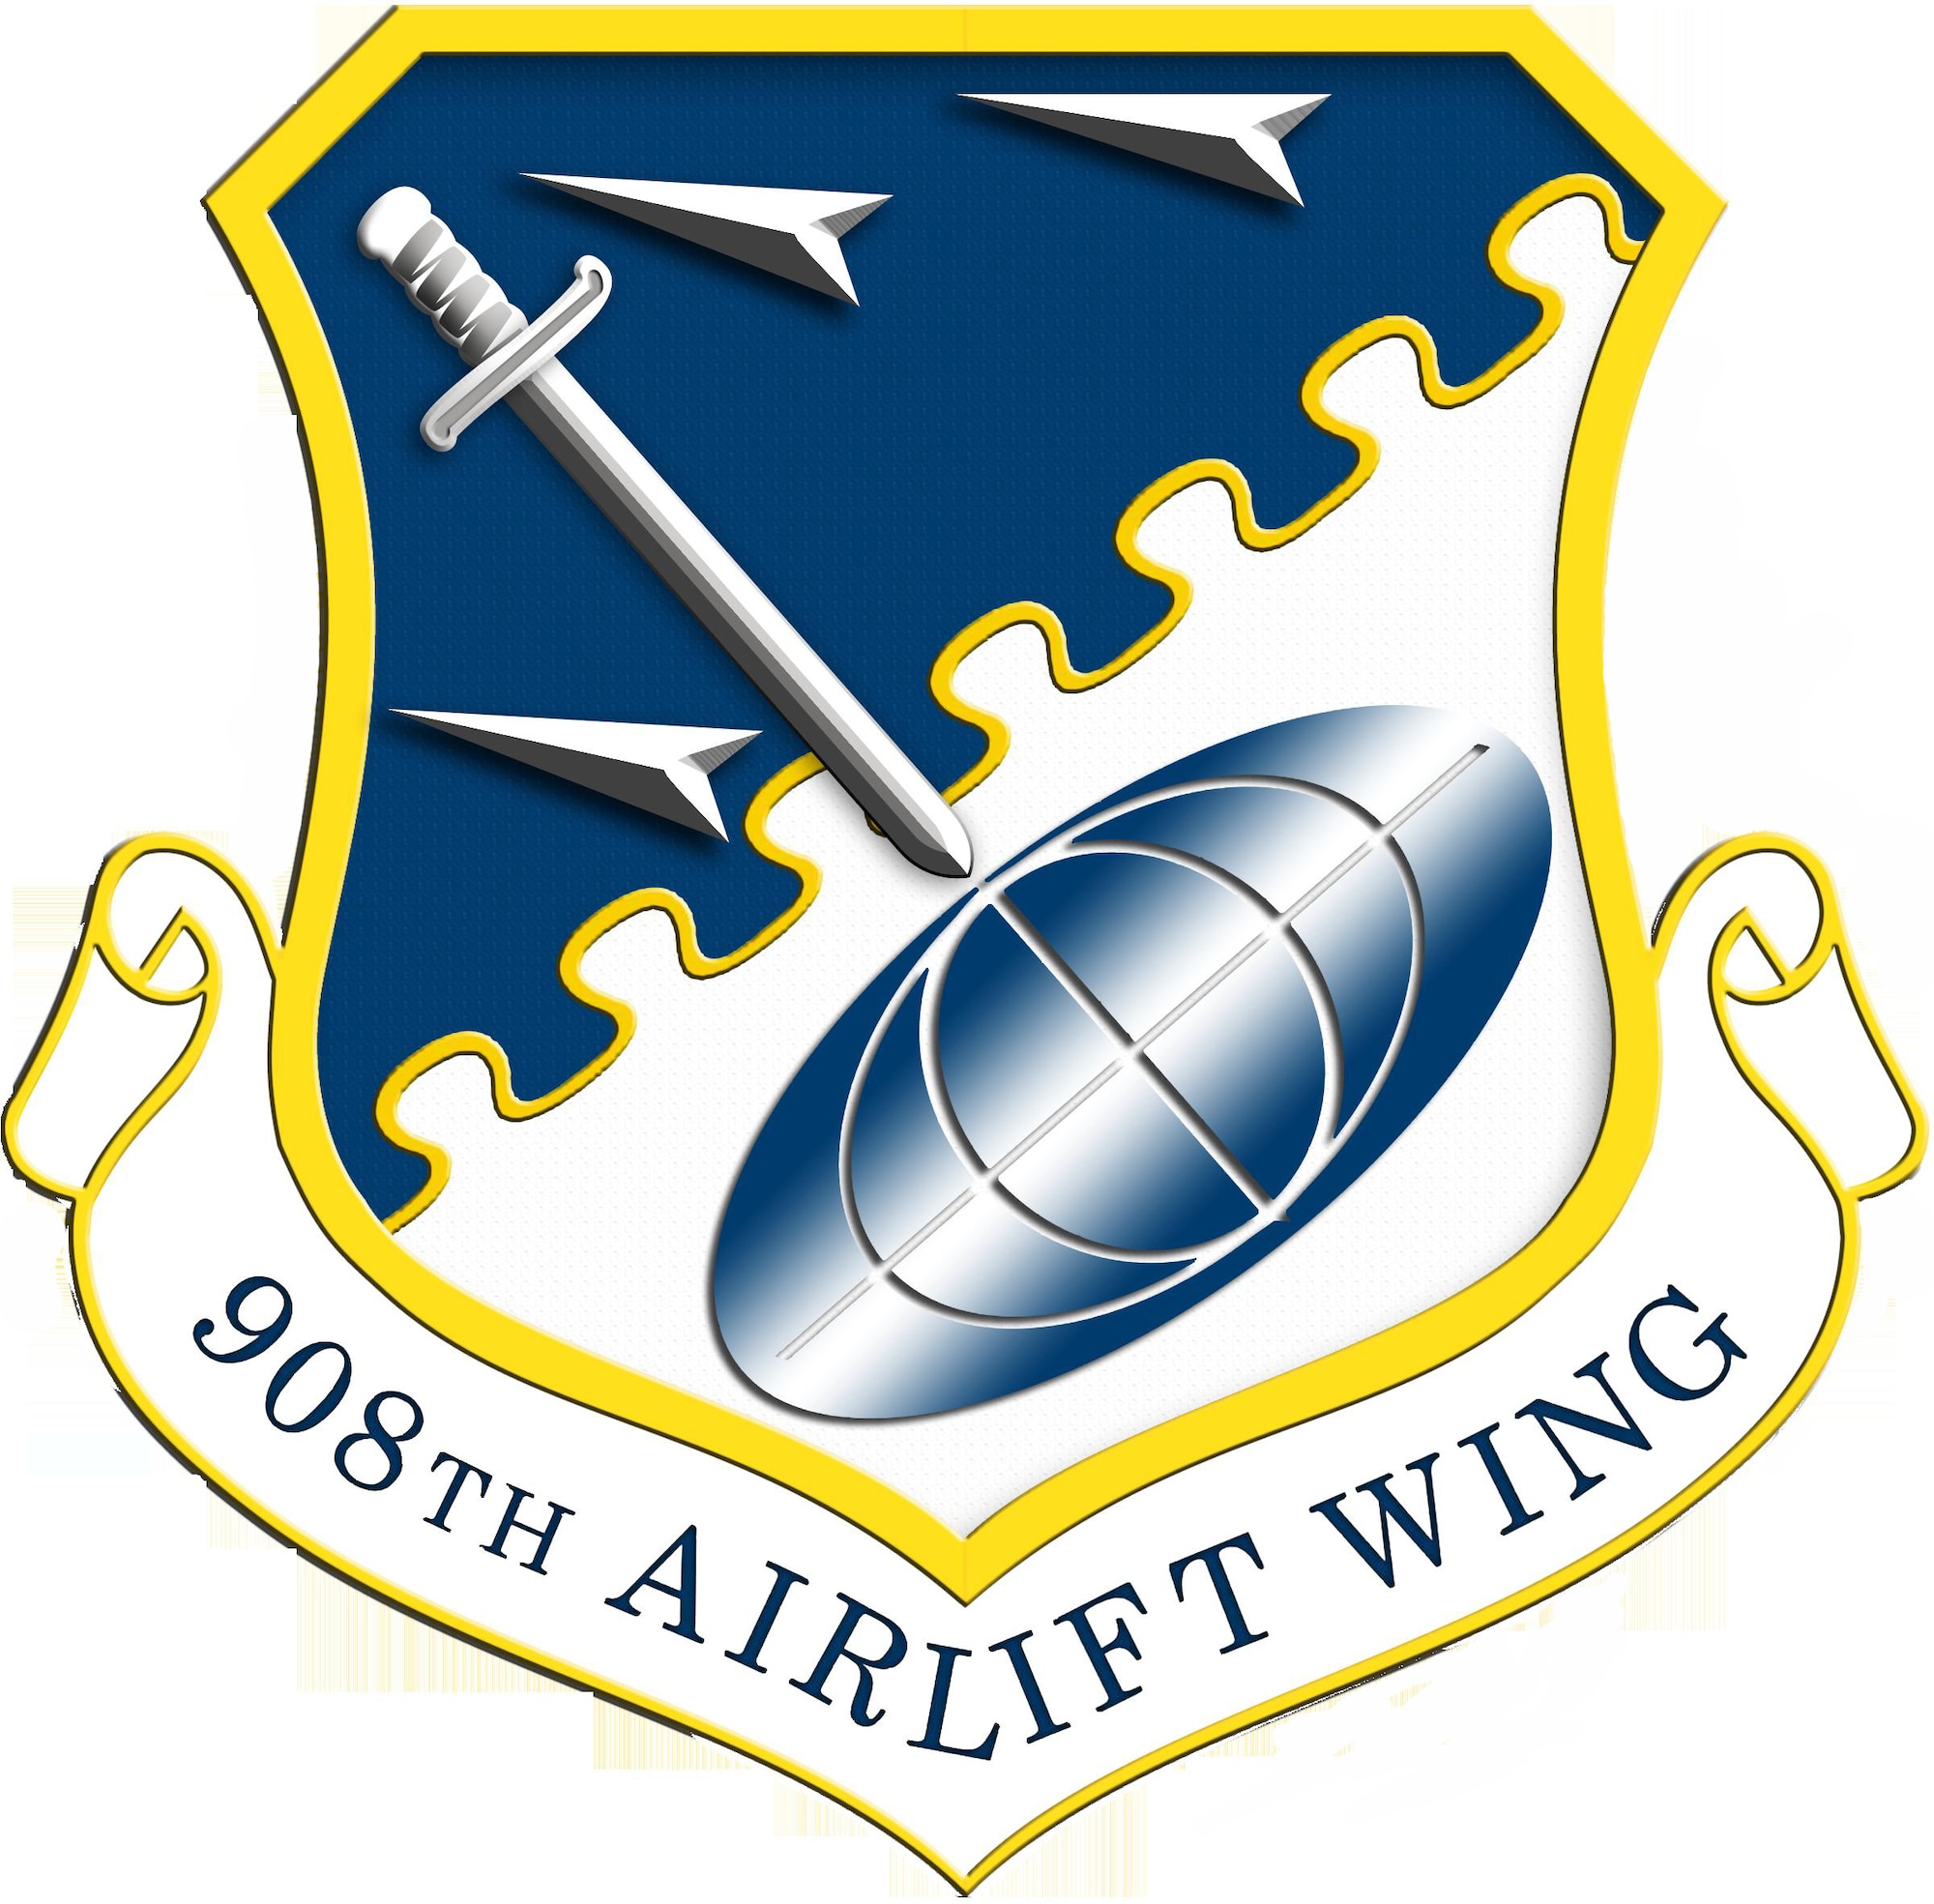 The 908th Airlift Wing at Maxwell AFB has several positions available, ranging from openings for flight crew and maintenance personnel to security force, historian and areospace medical positions.